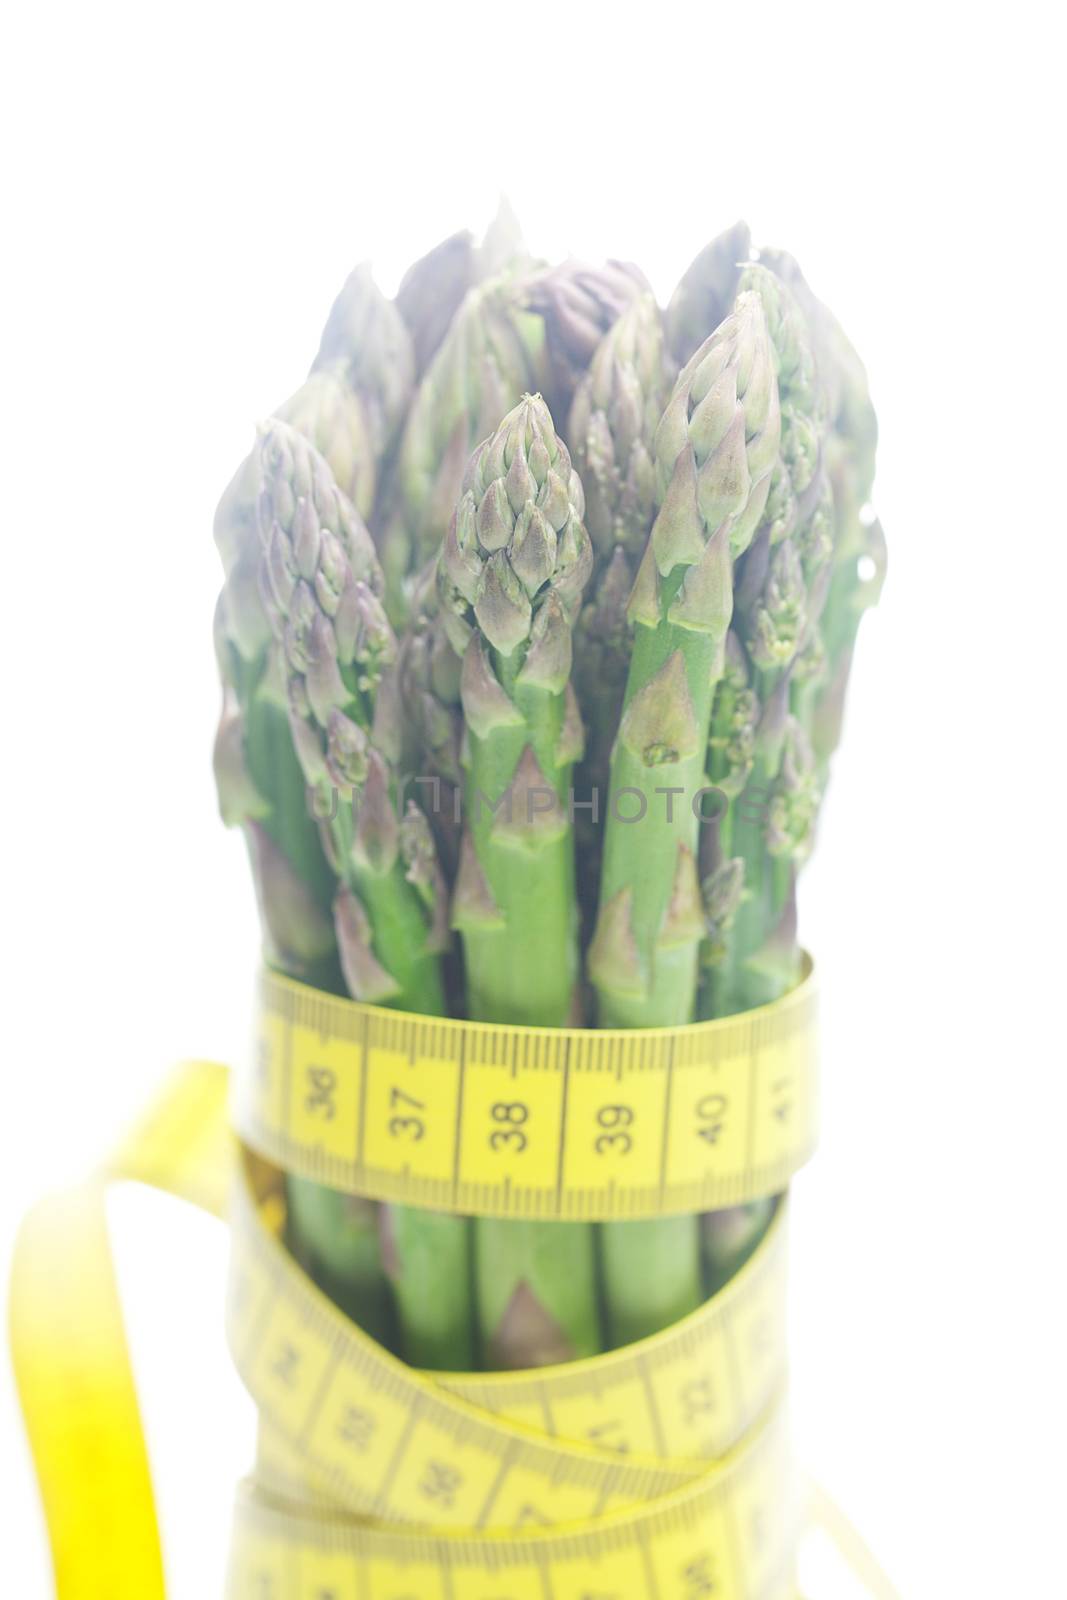 asparagus tied with measuring tape isolated on white by jannyjus